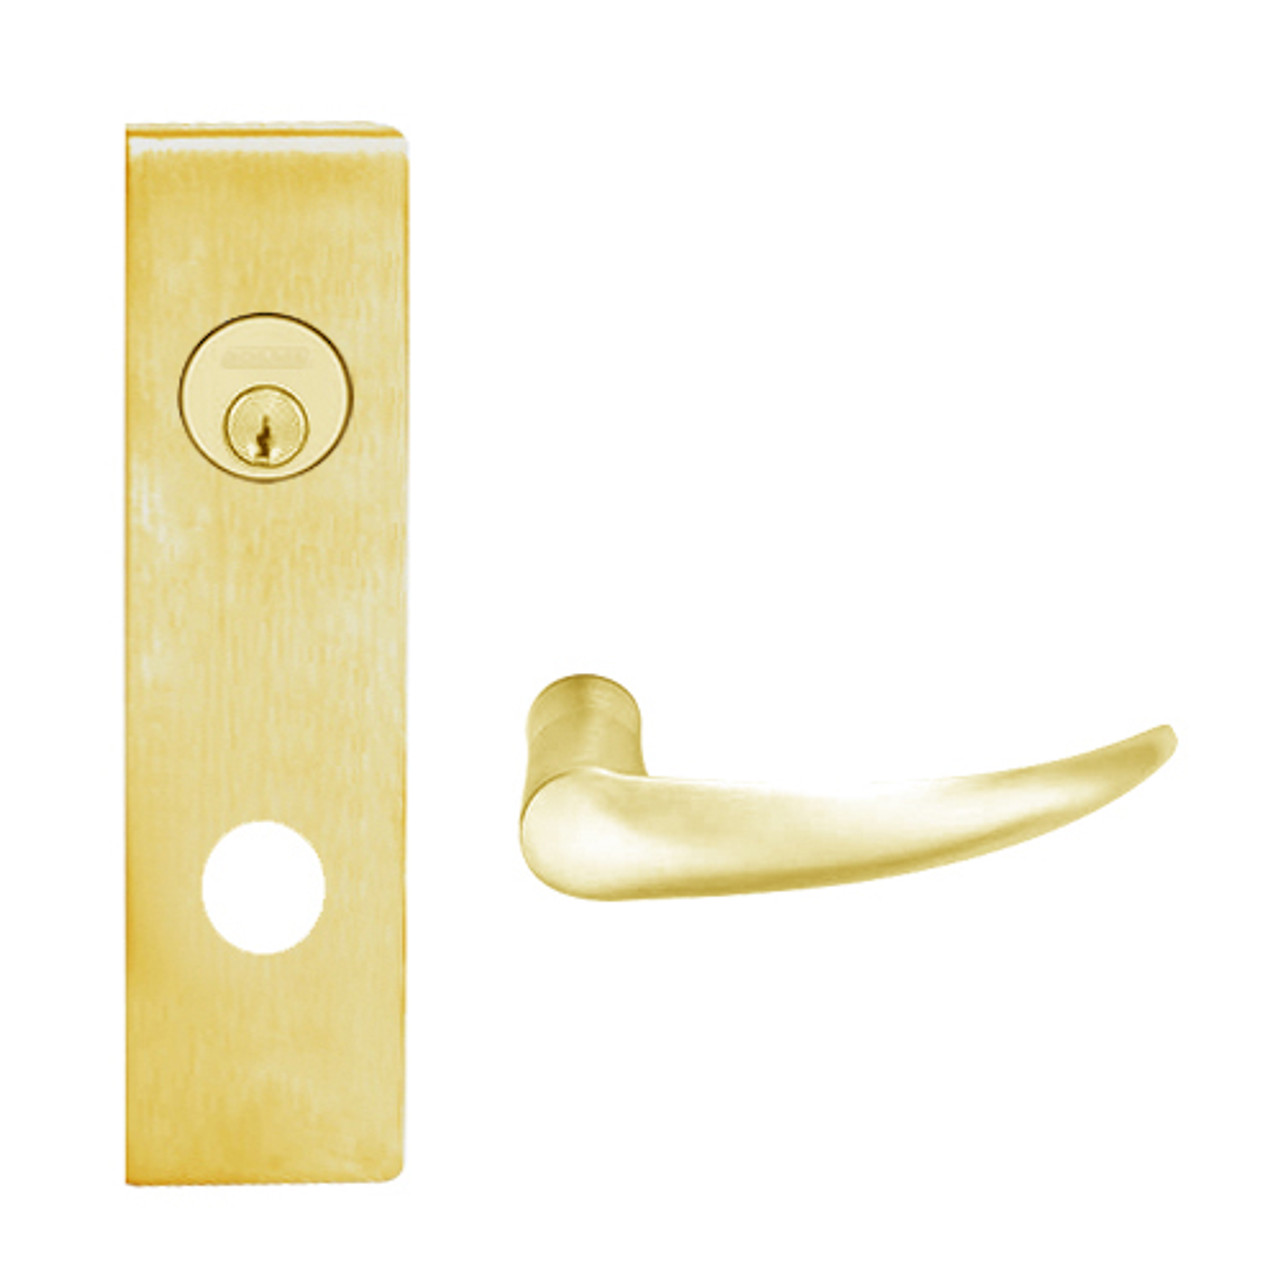 L9026P-OME-N-605 Schlage L Series Exit Lock with Cylinder Commercial Mortise Lock with Omega Lever Design in Bright Brass